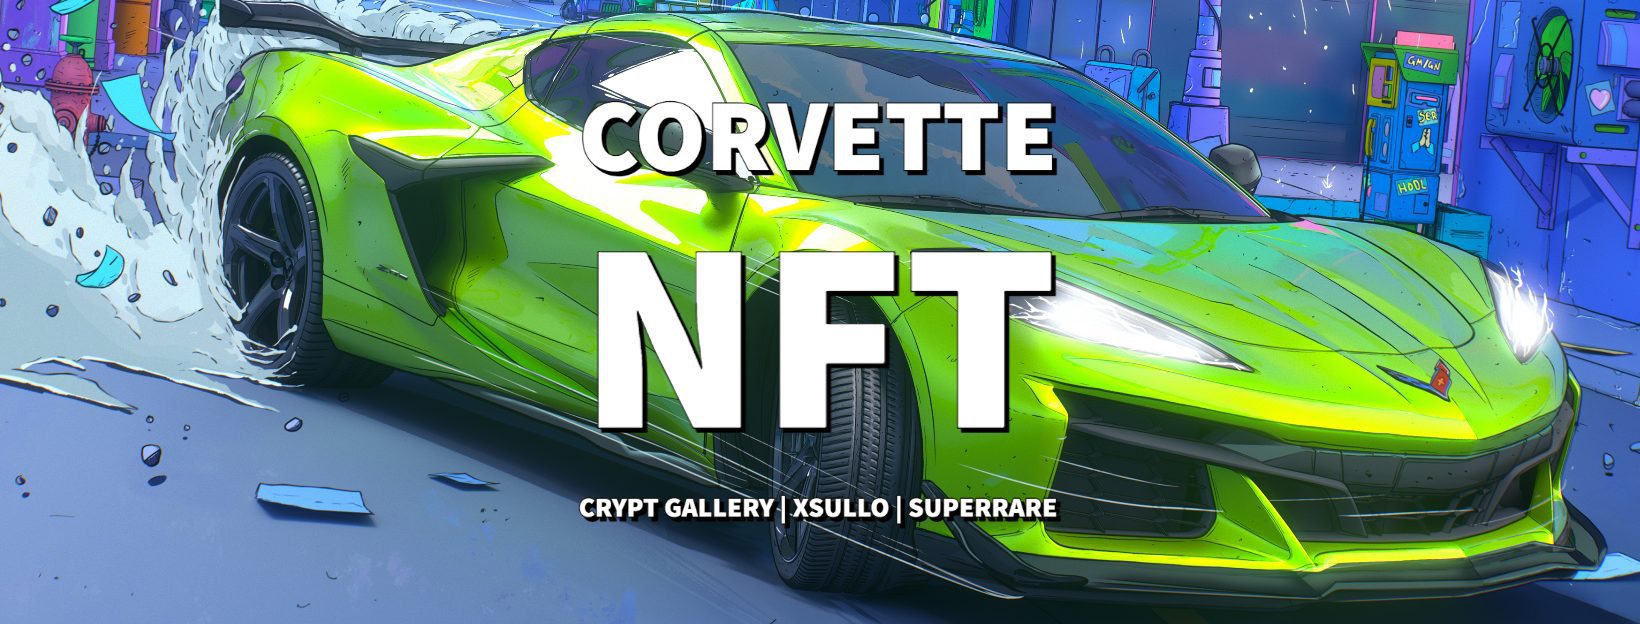 Chevrolet Partners with SuperRare and King of Midtown / Crypt Gallery to release  Corvette NFT